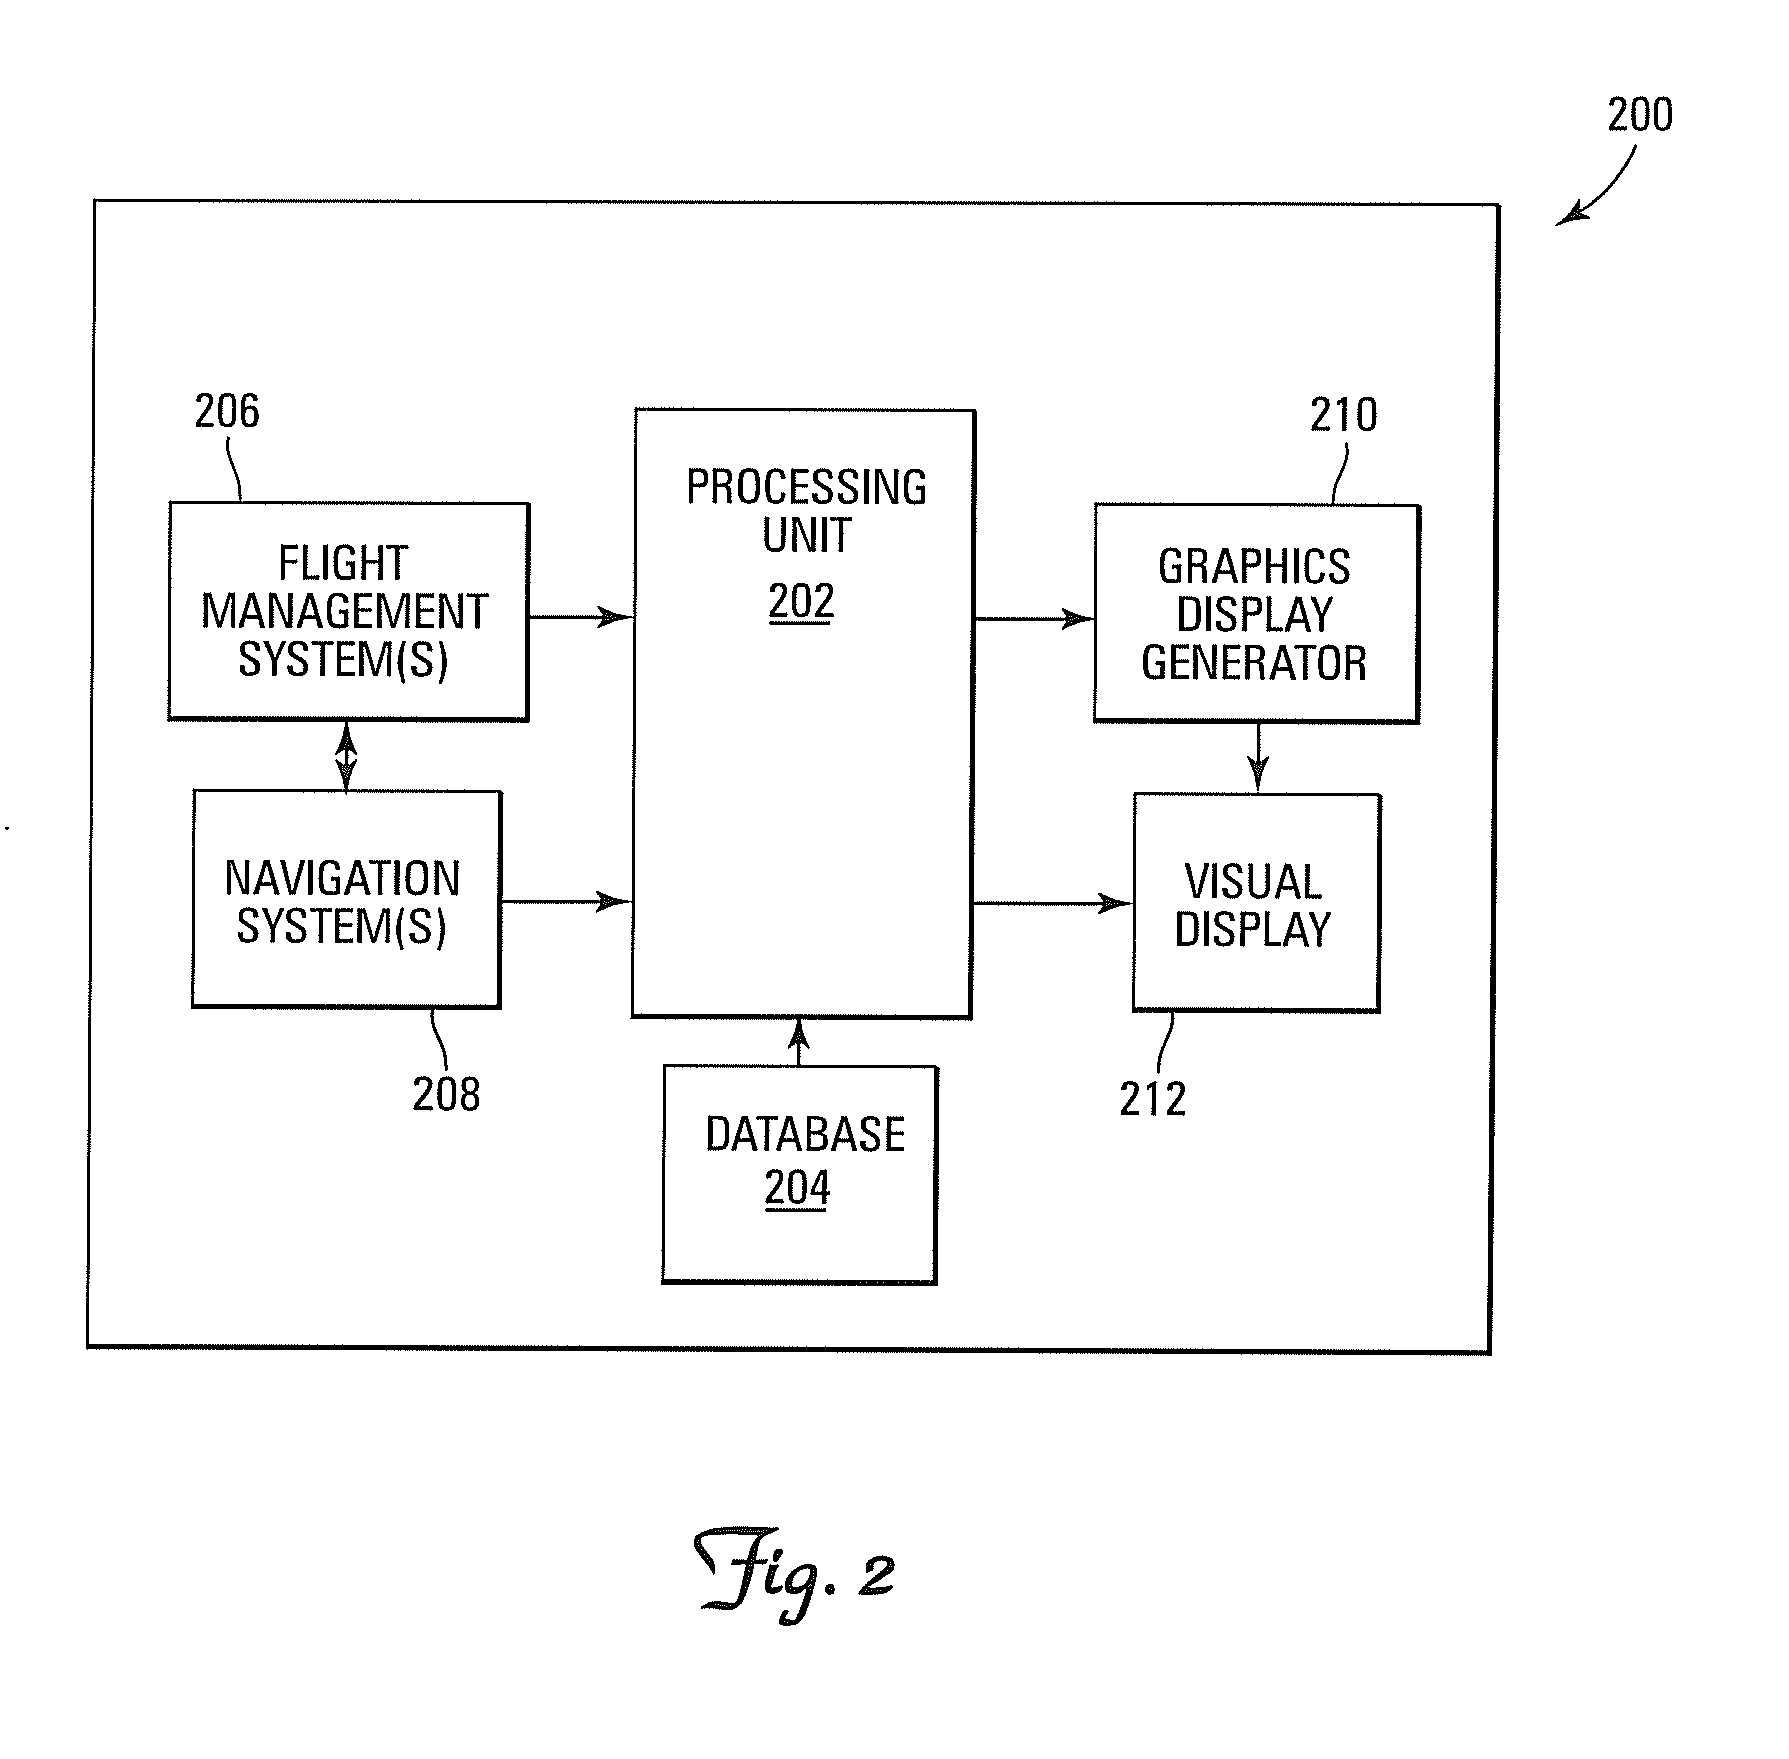 System and method for increasing visibility of critical flight information on aircraft displays